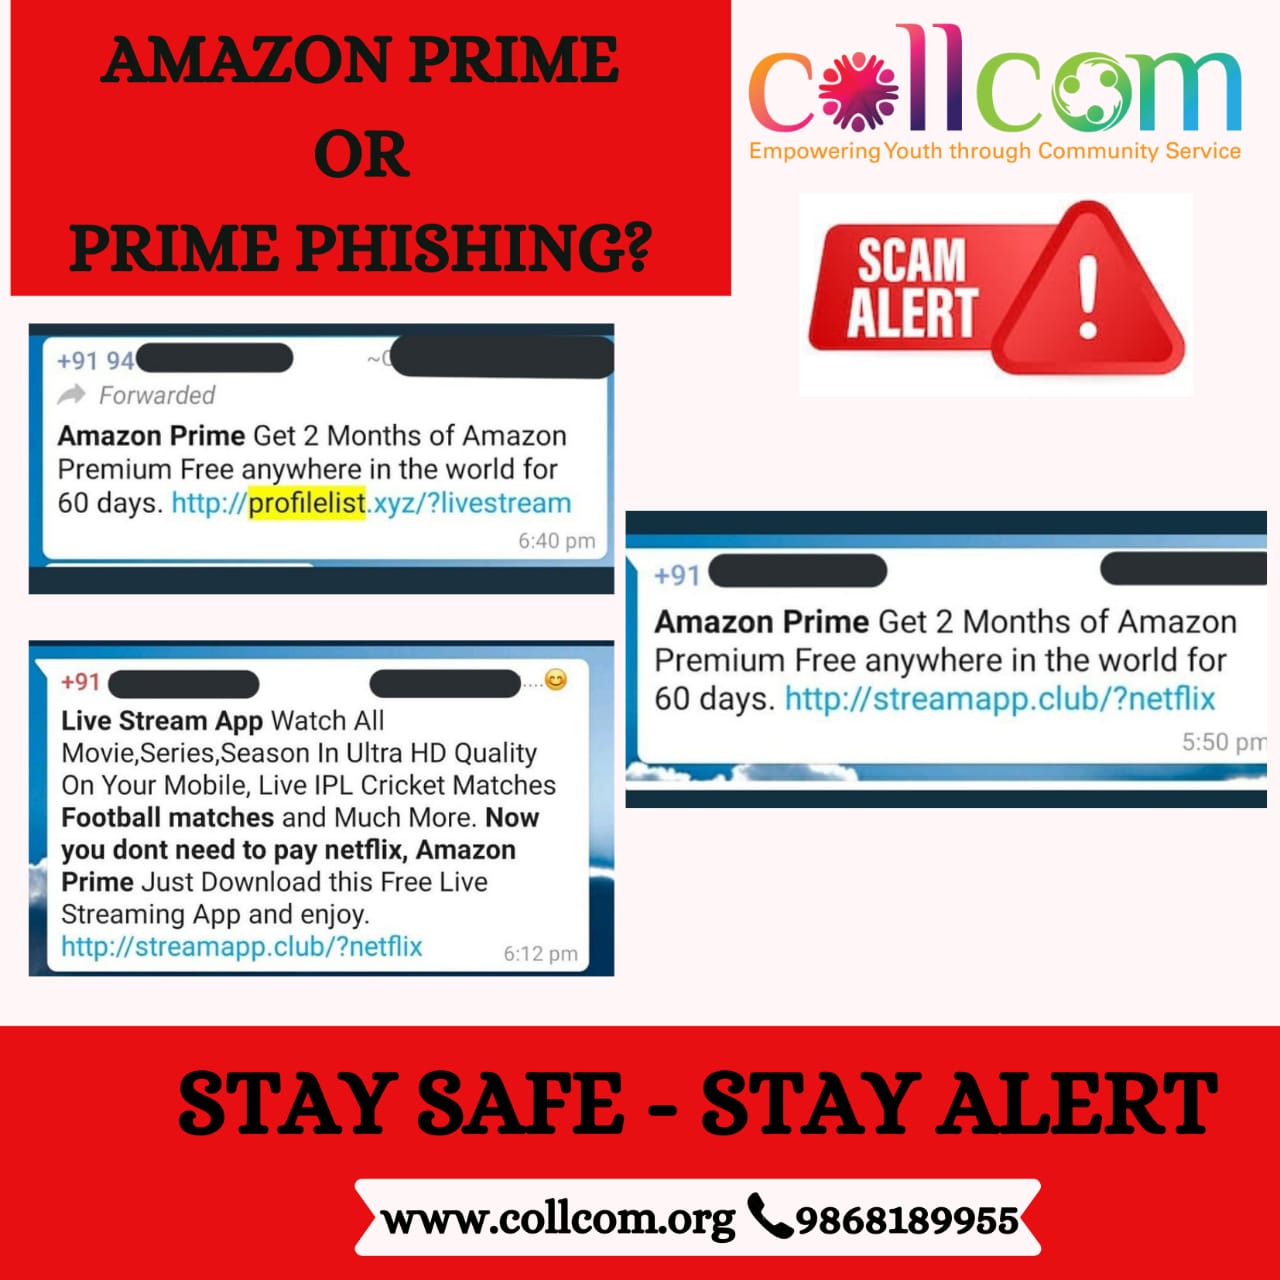 Amazon Gift Card Scam Poster